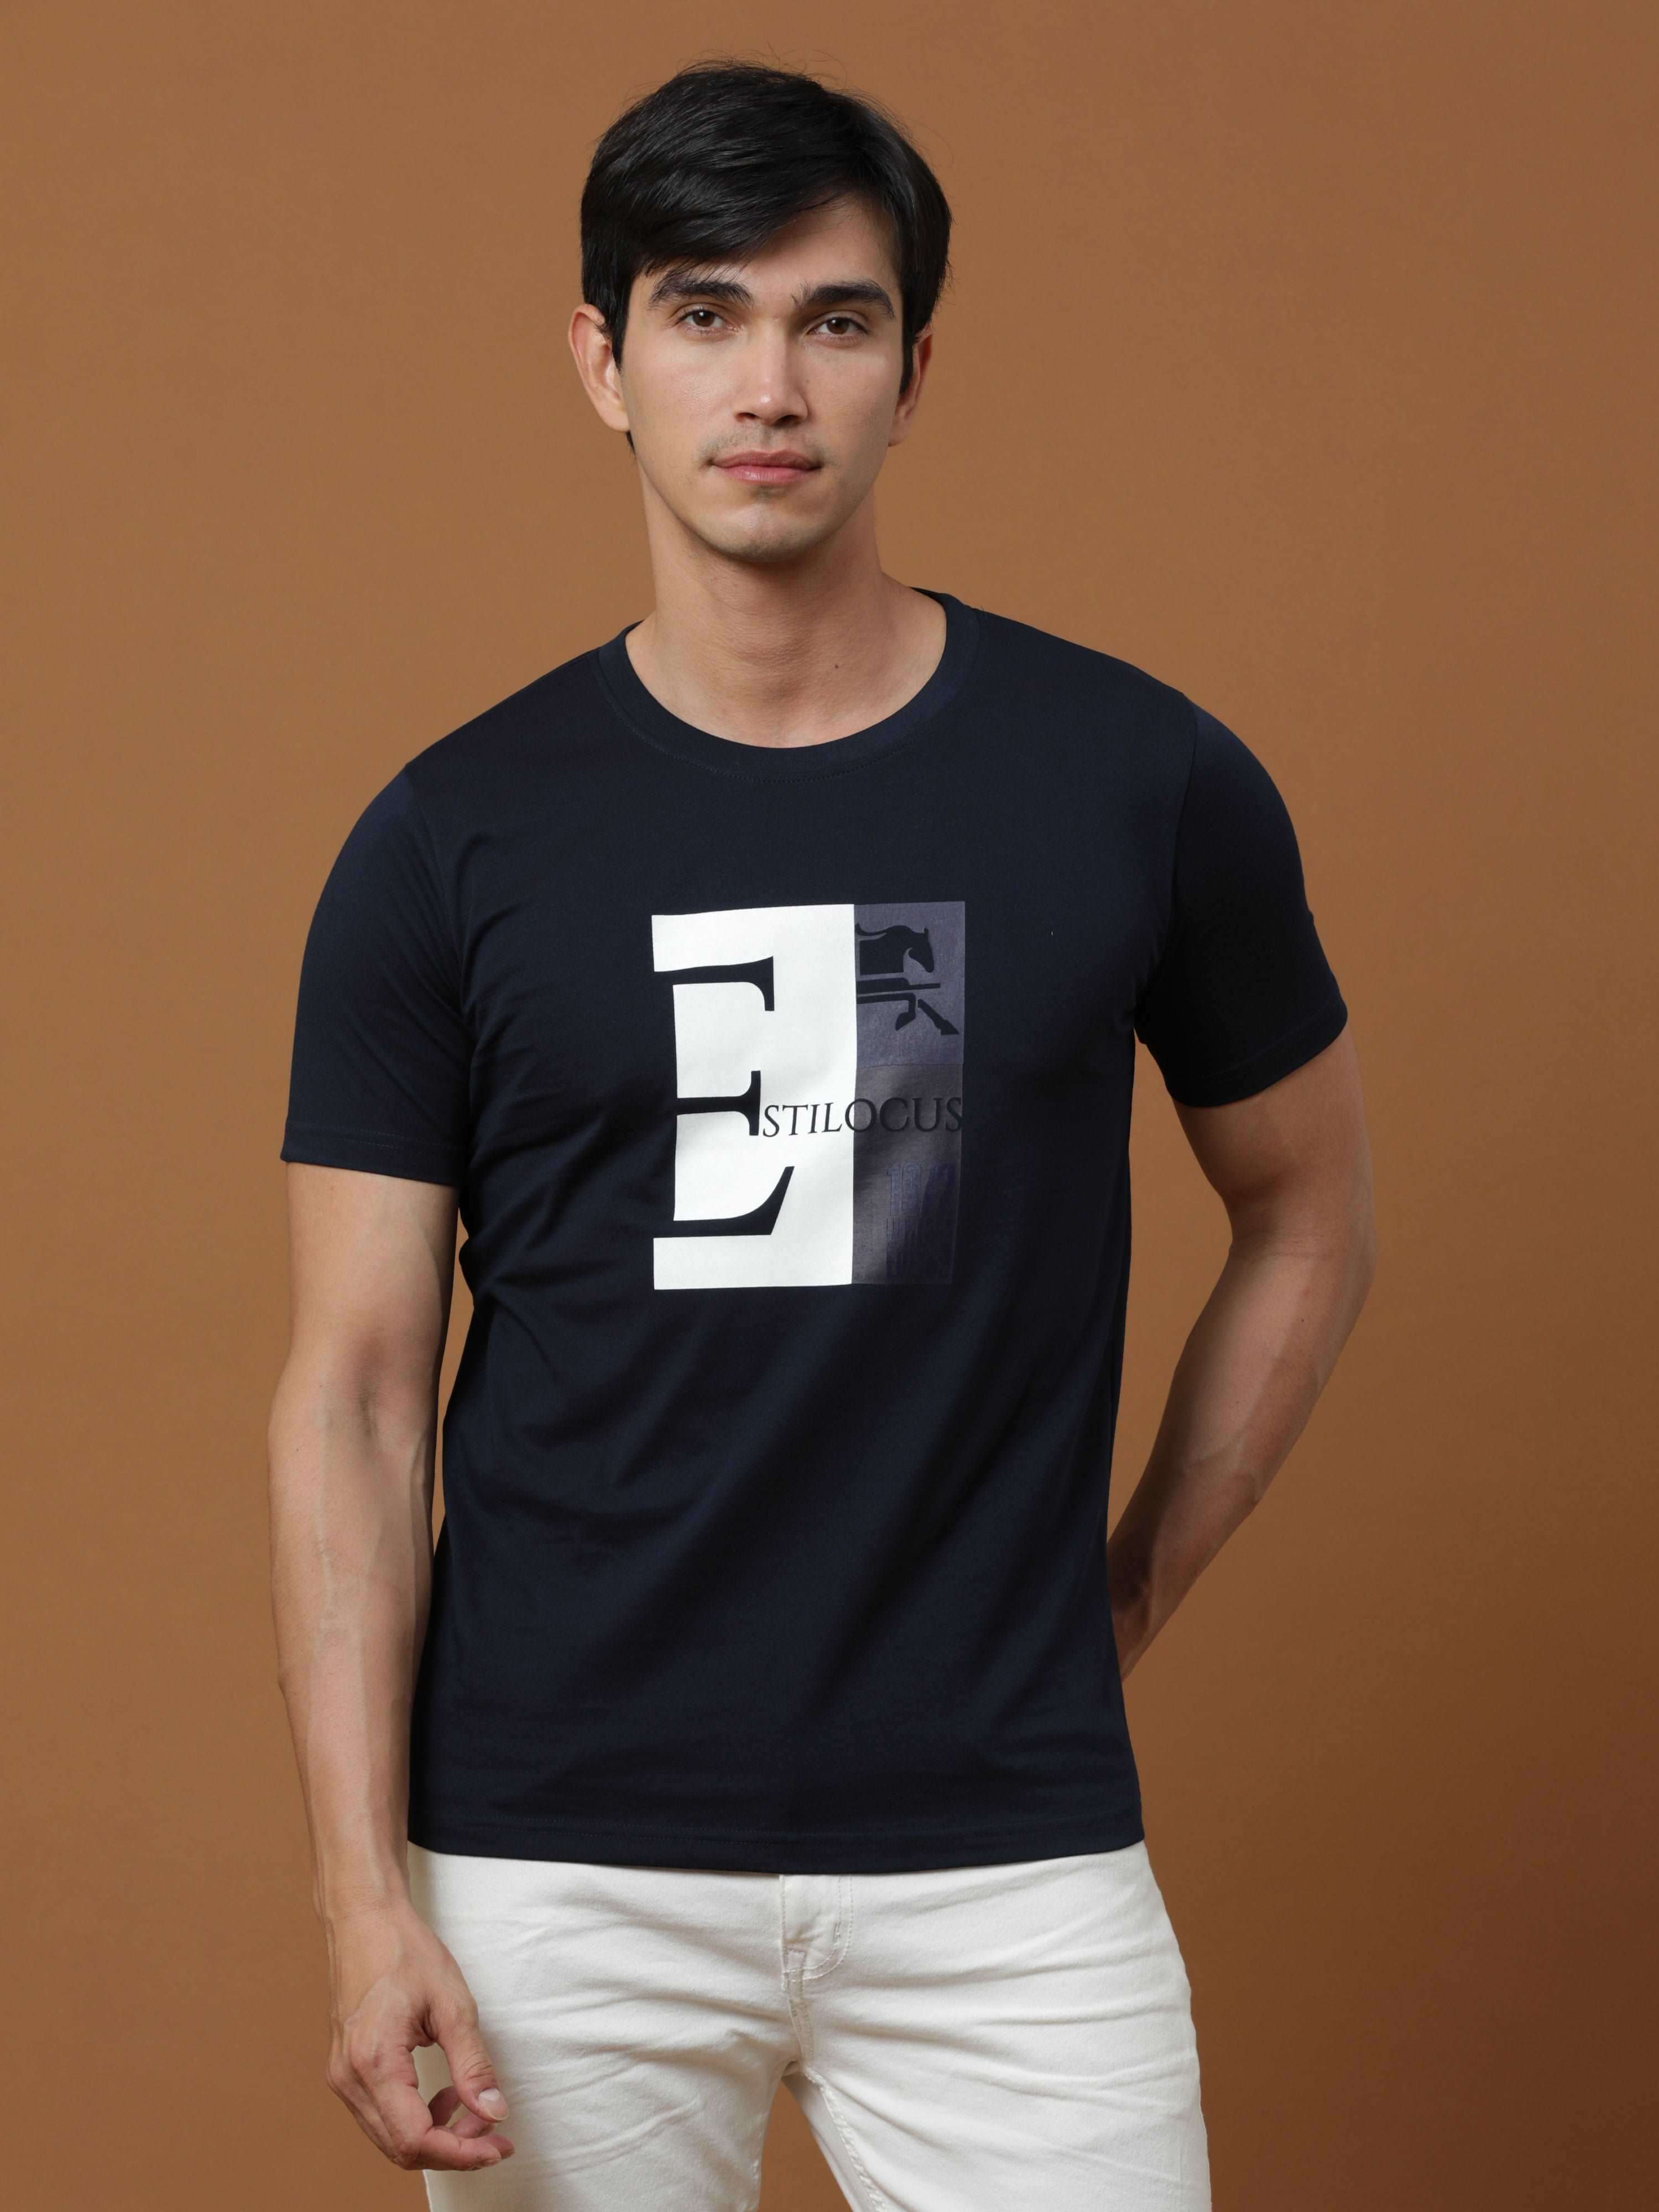 Vintage Edition Printed Navy T Shirt shop online at Estilocus. 100% Cotton Designed and printed on knitted fabric. The fabric is stretchy and lightweight, with a soft skin feel and no wrinkles. Crew neck collar which is smooth on the neck and keeps you co